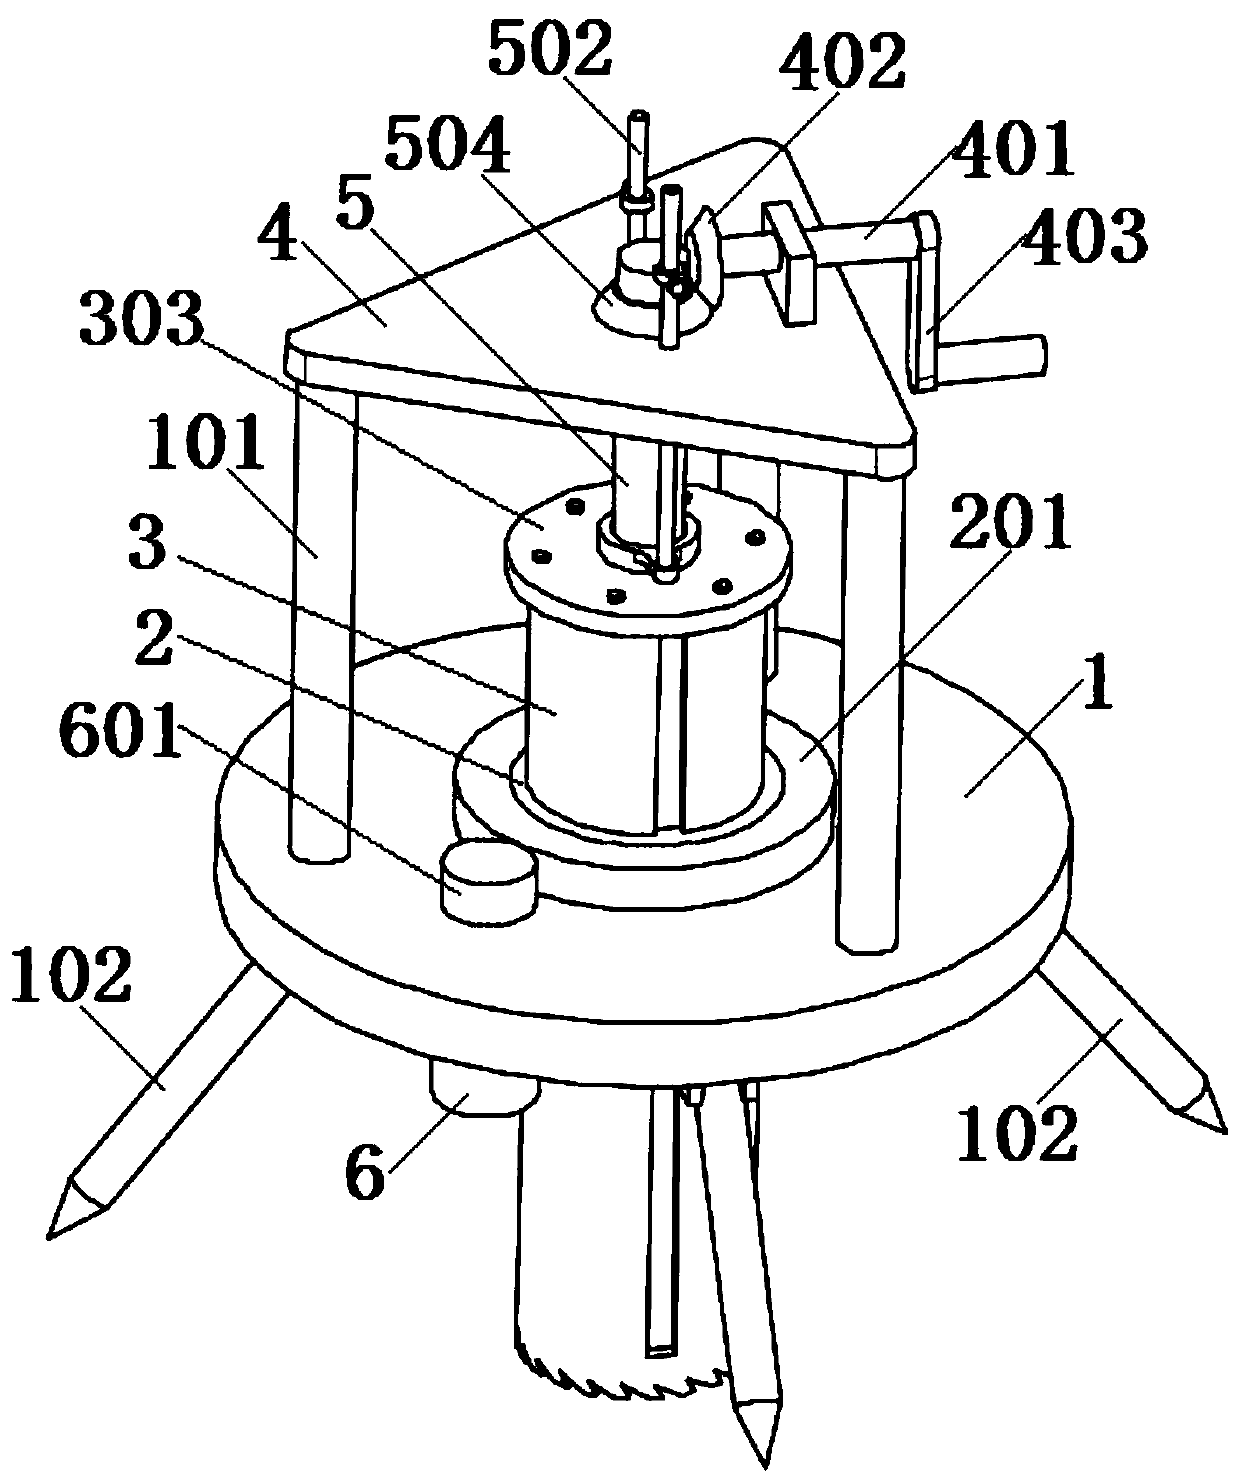 Accurate soil sampling device and method